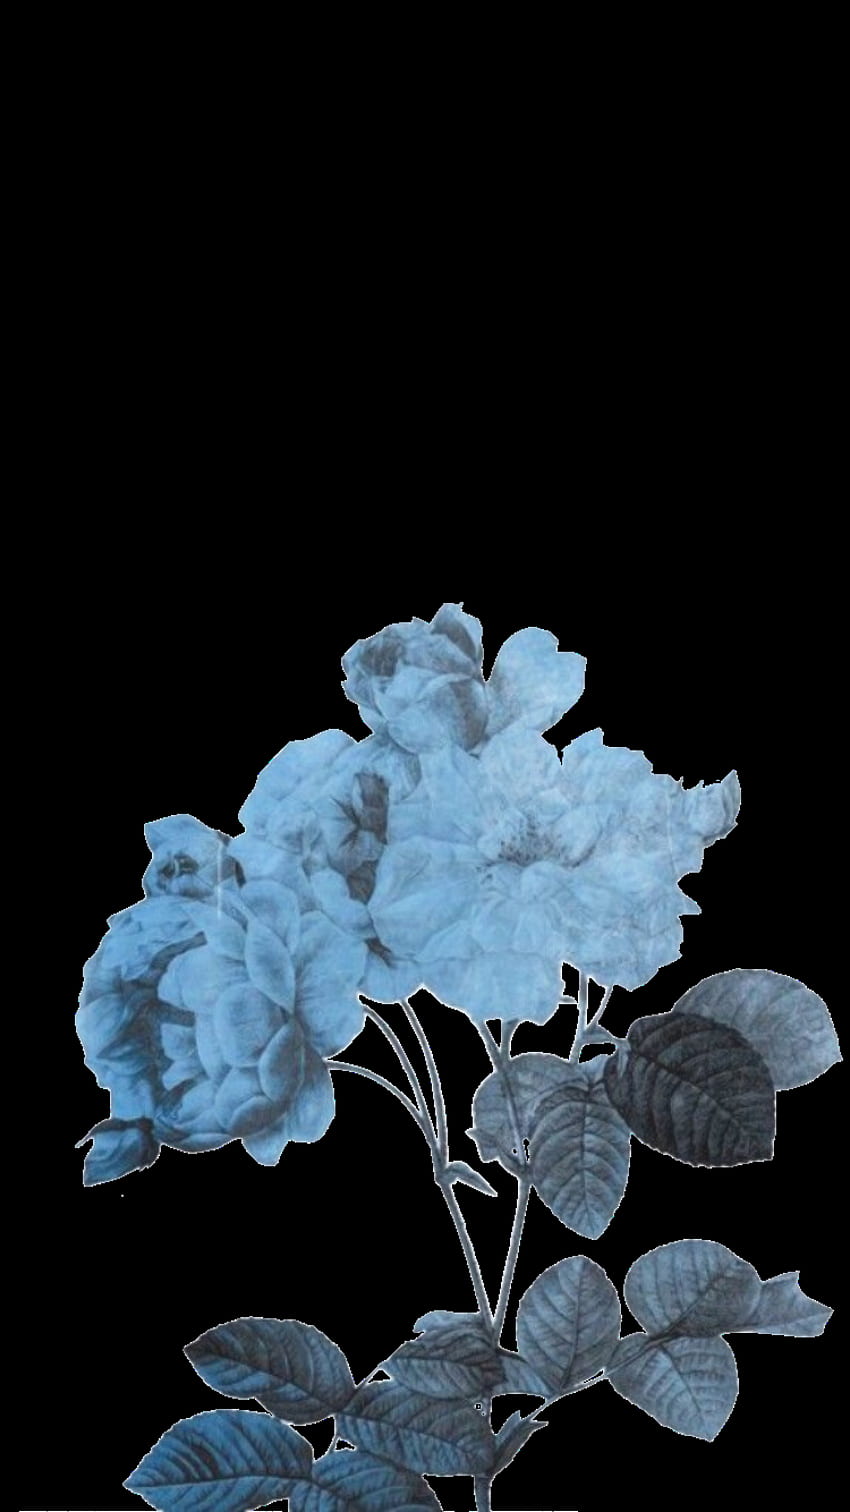 Transparent blue flowers. Blue , Everything is blue, Blue aesthetic ...